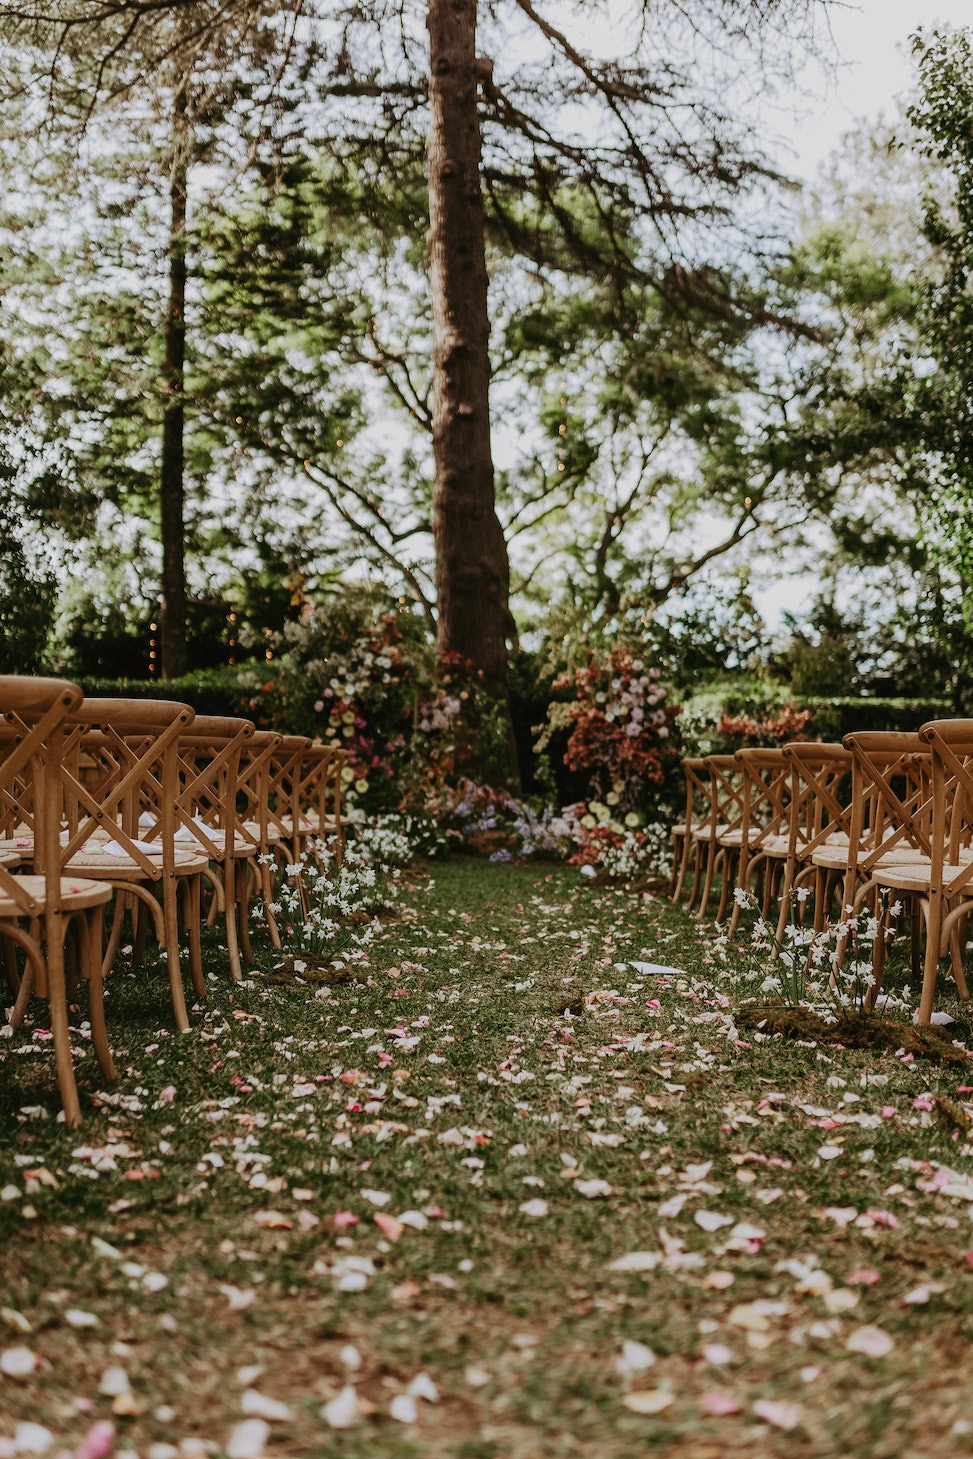 Wedding ceremony aisle with rose petals